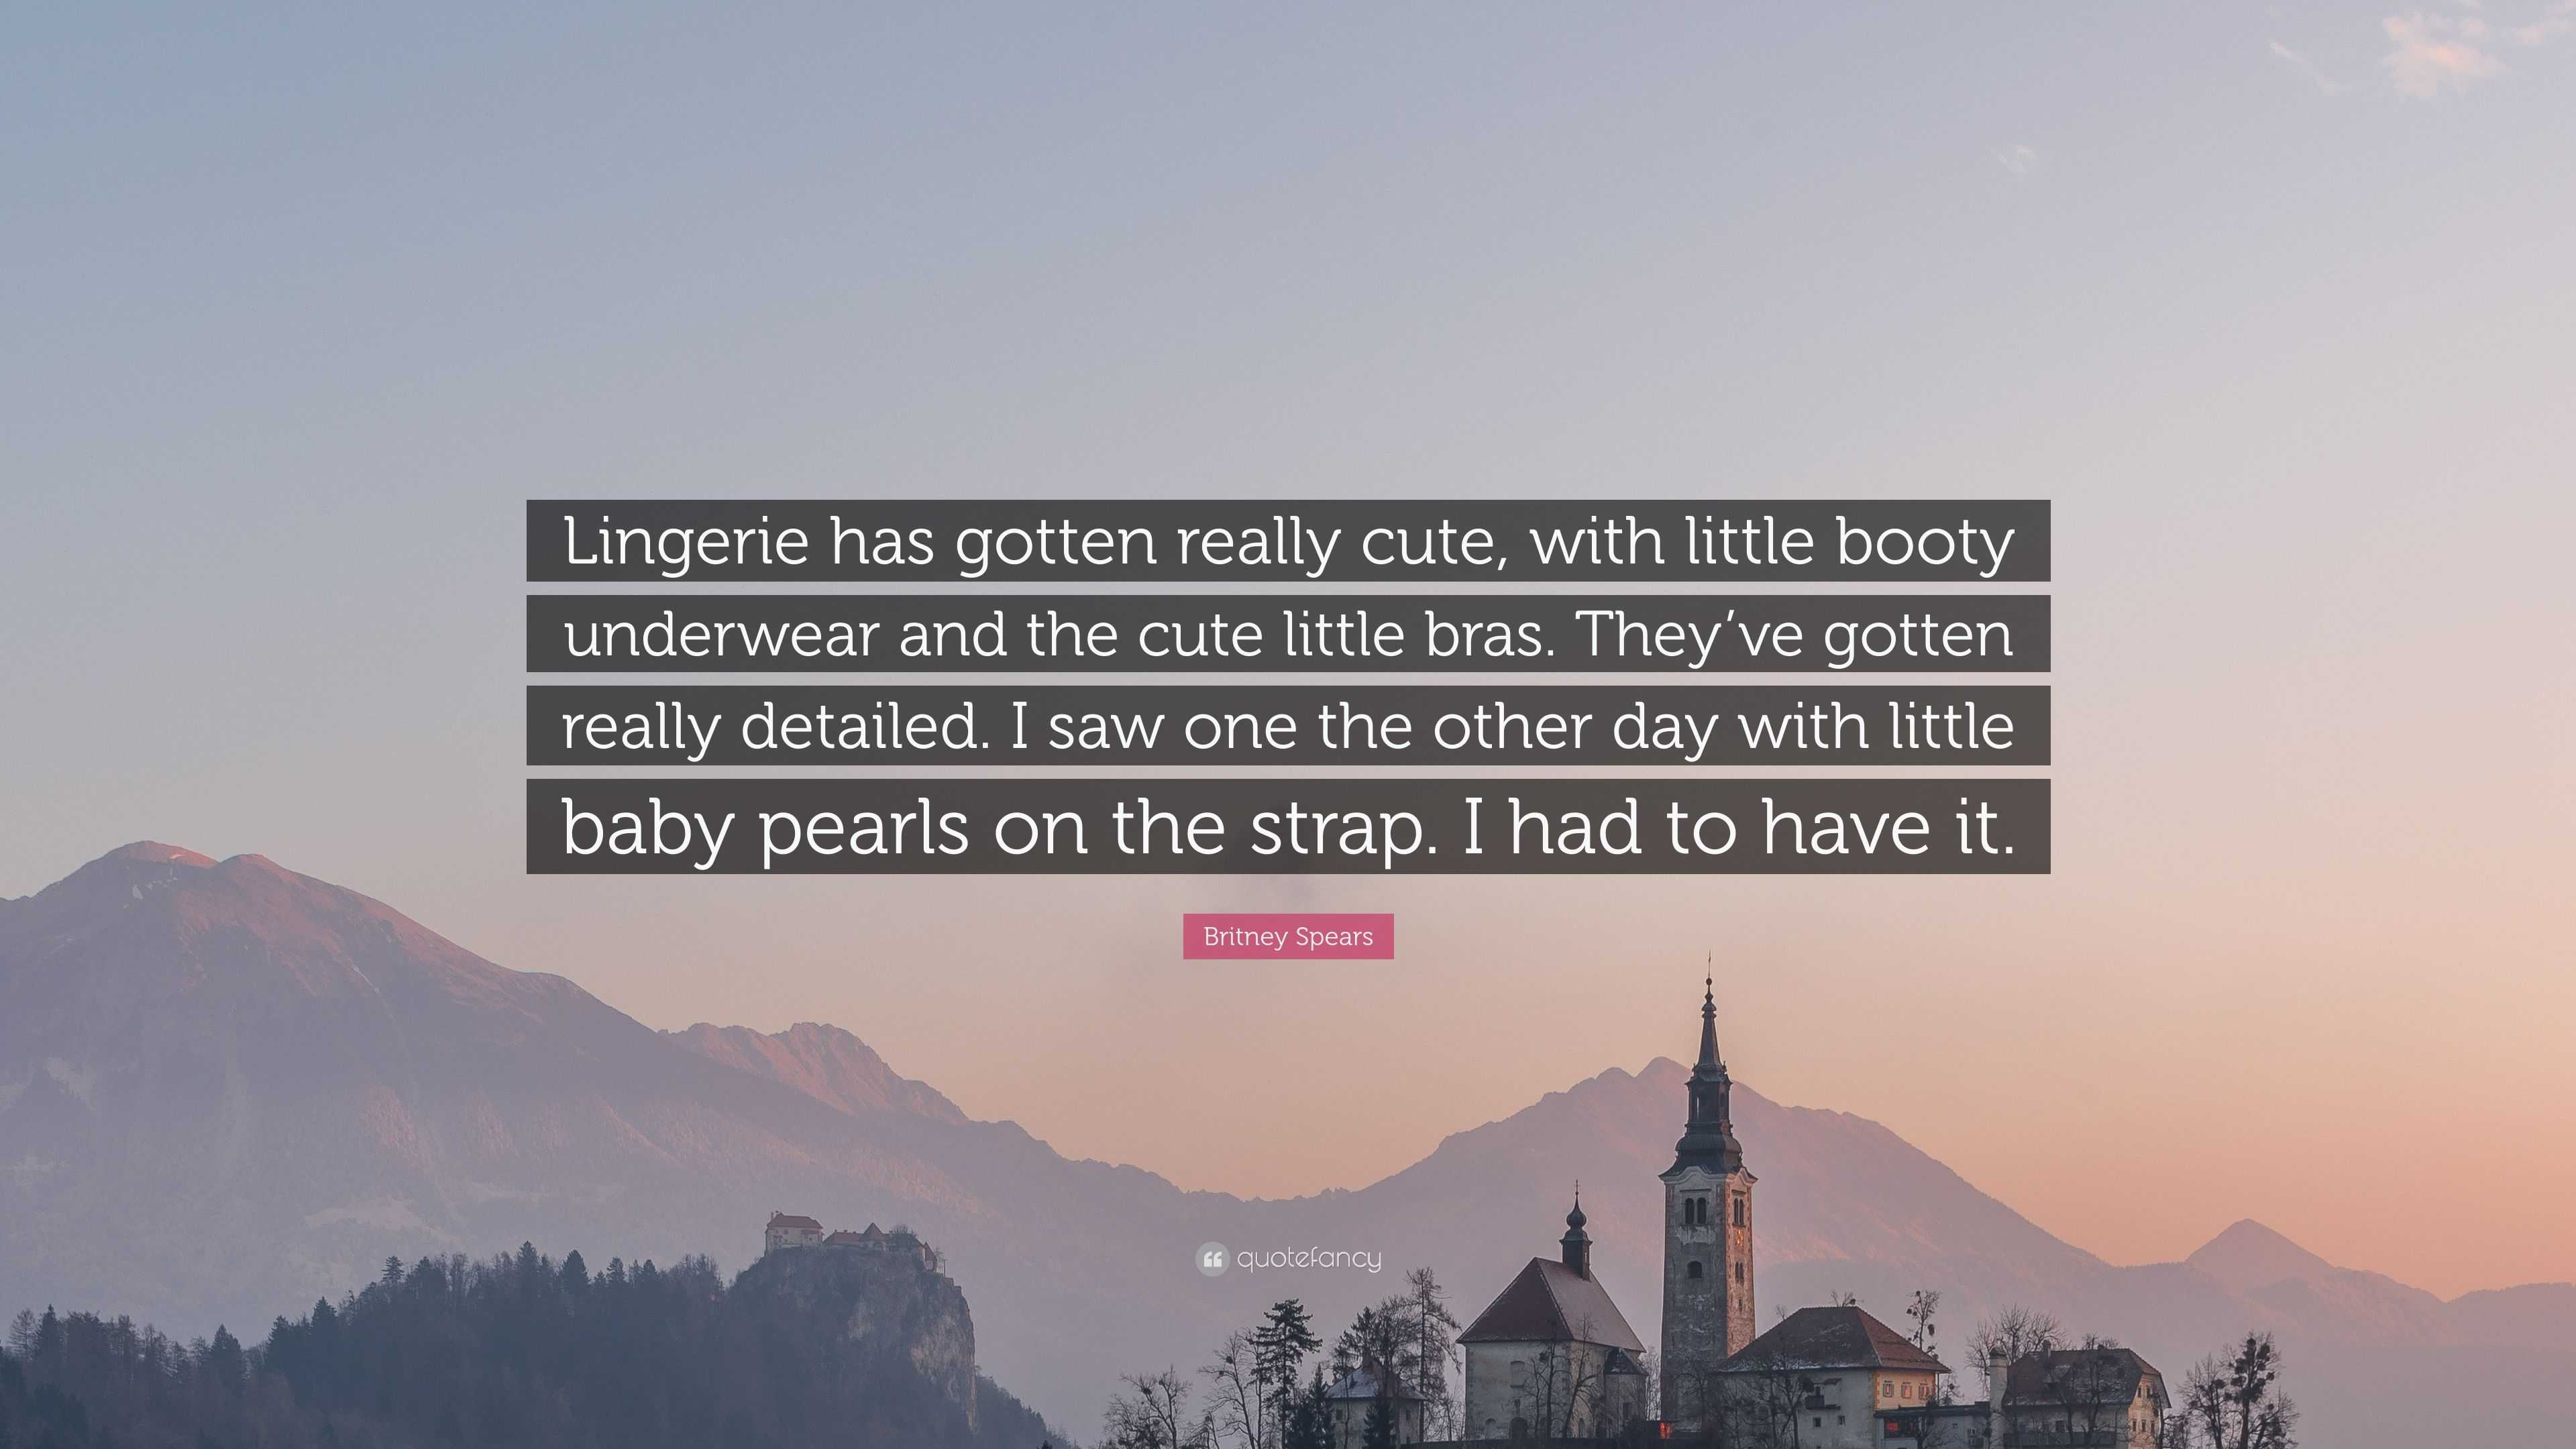 https://quotefancy.com/media/wallpaper/3840x2160/5573782-Britney-Spears-Quote-Lingerie-has-gotten-really-cute-with-little.jpg